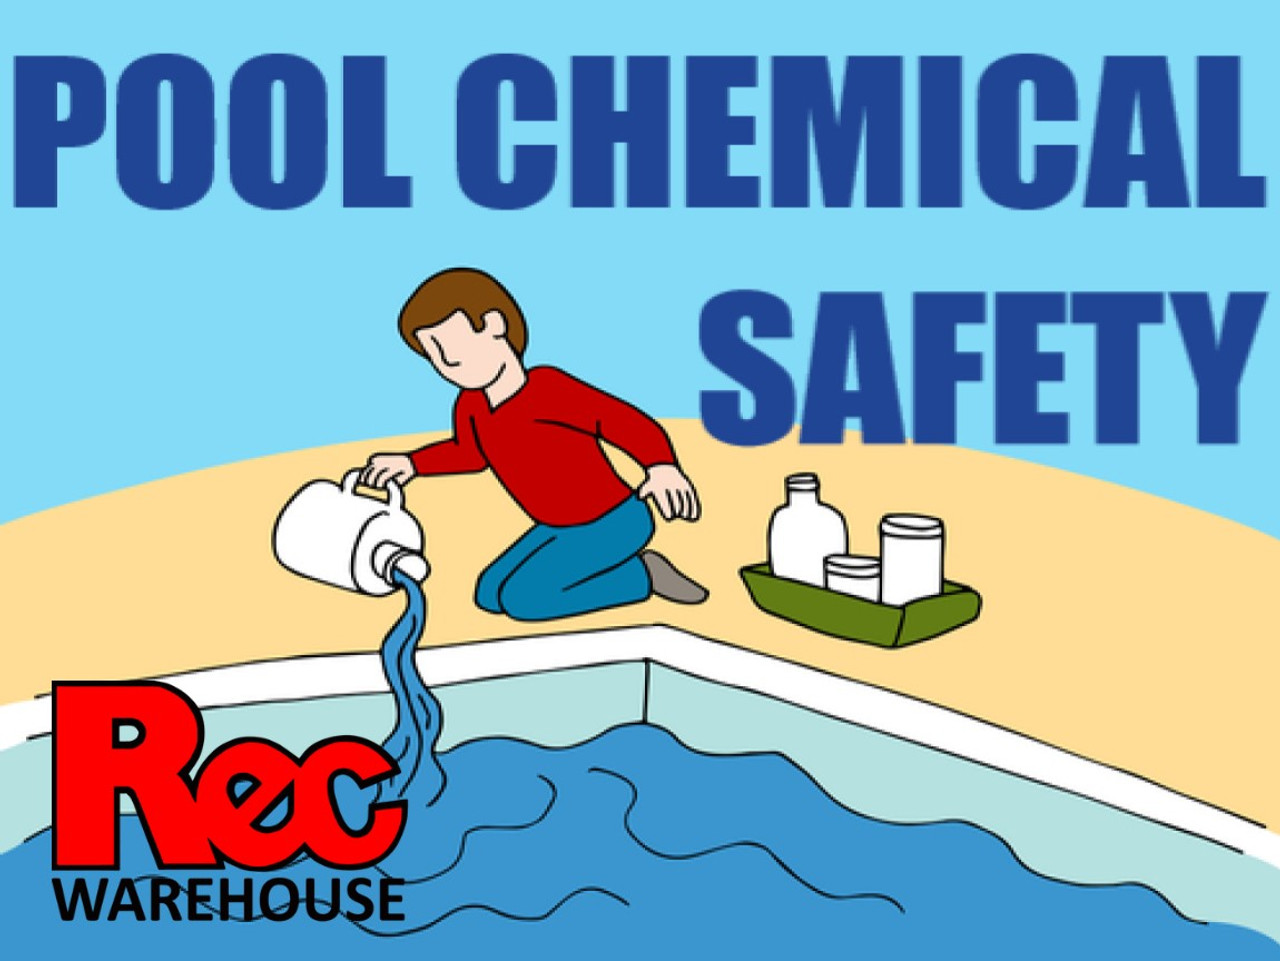 Safe and proper storage and usage of common pool chemicals